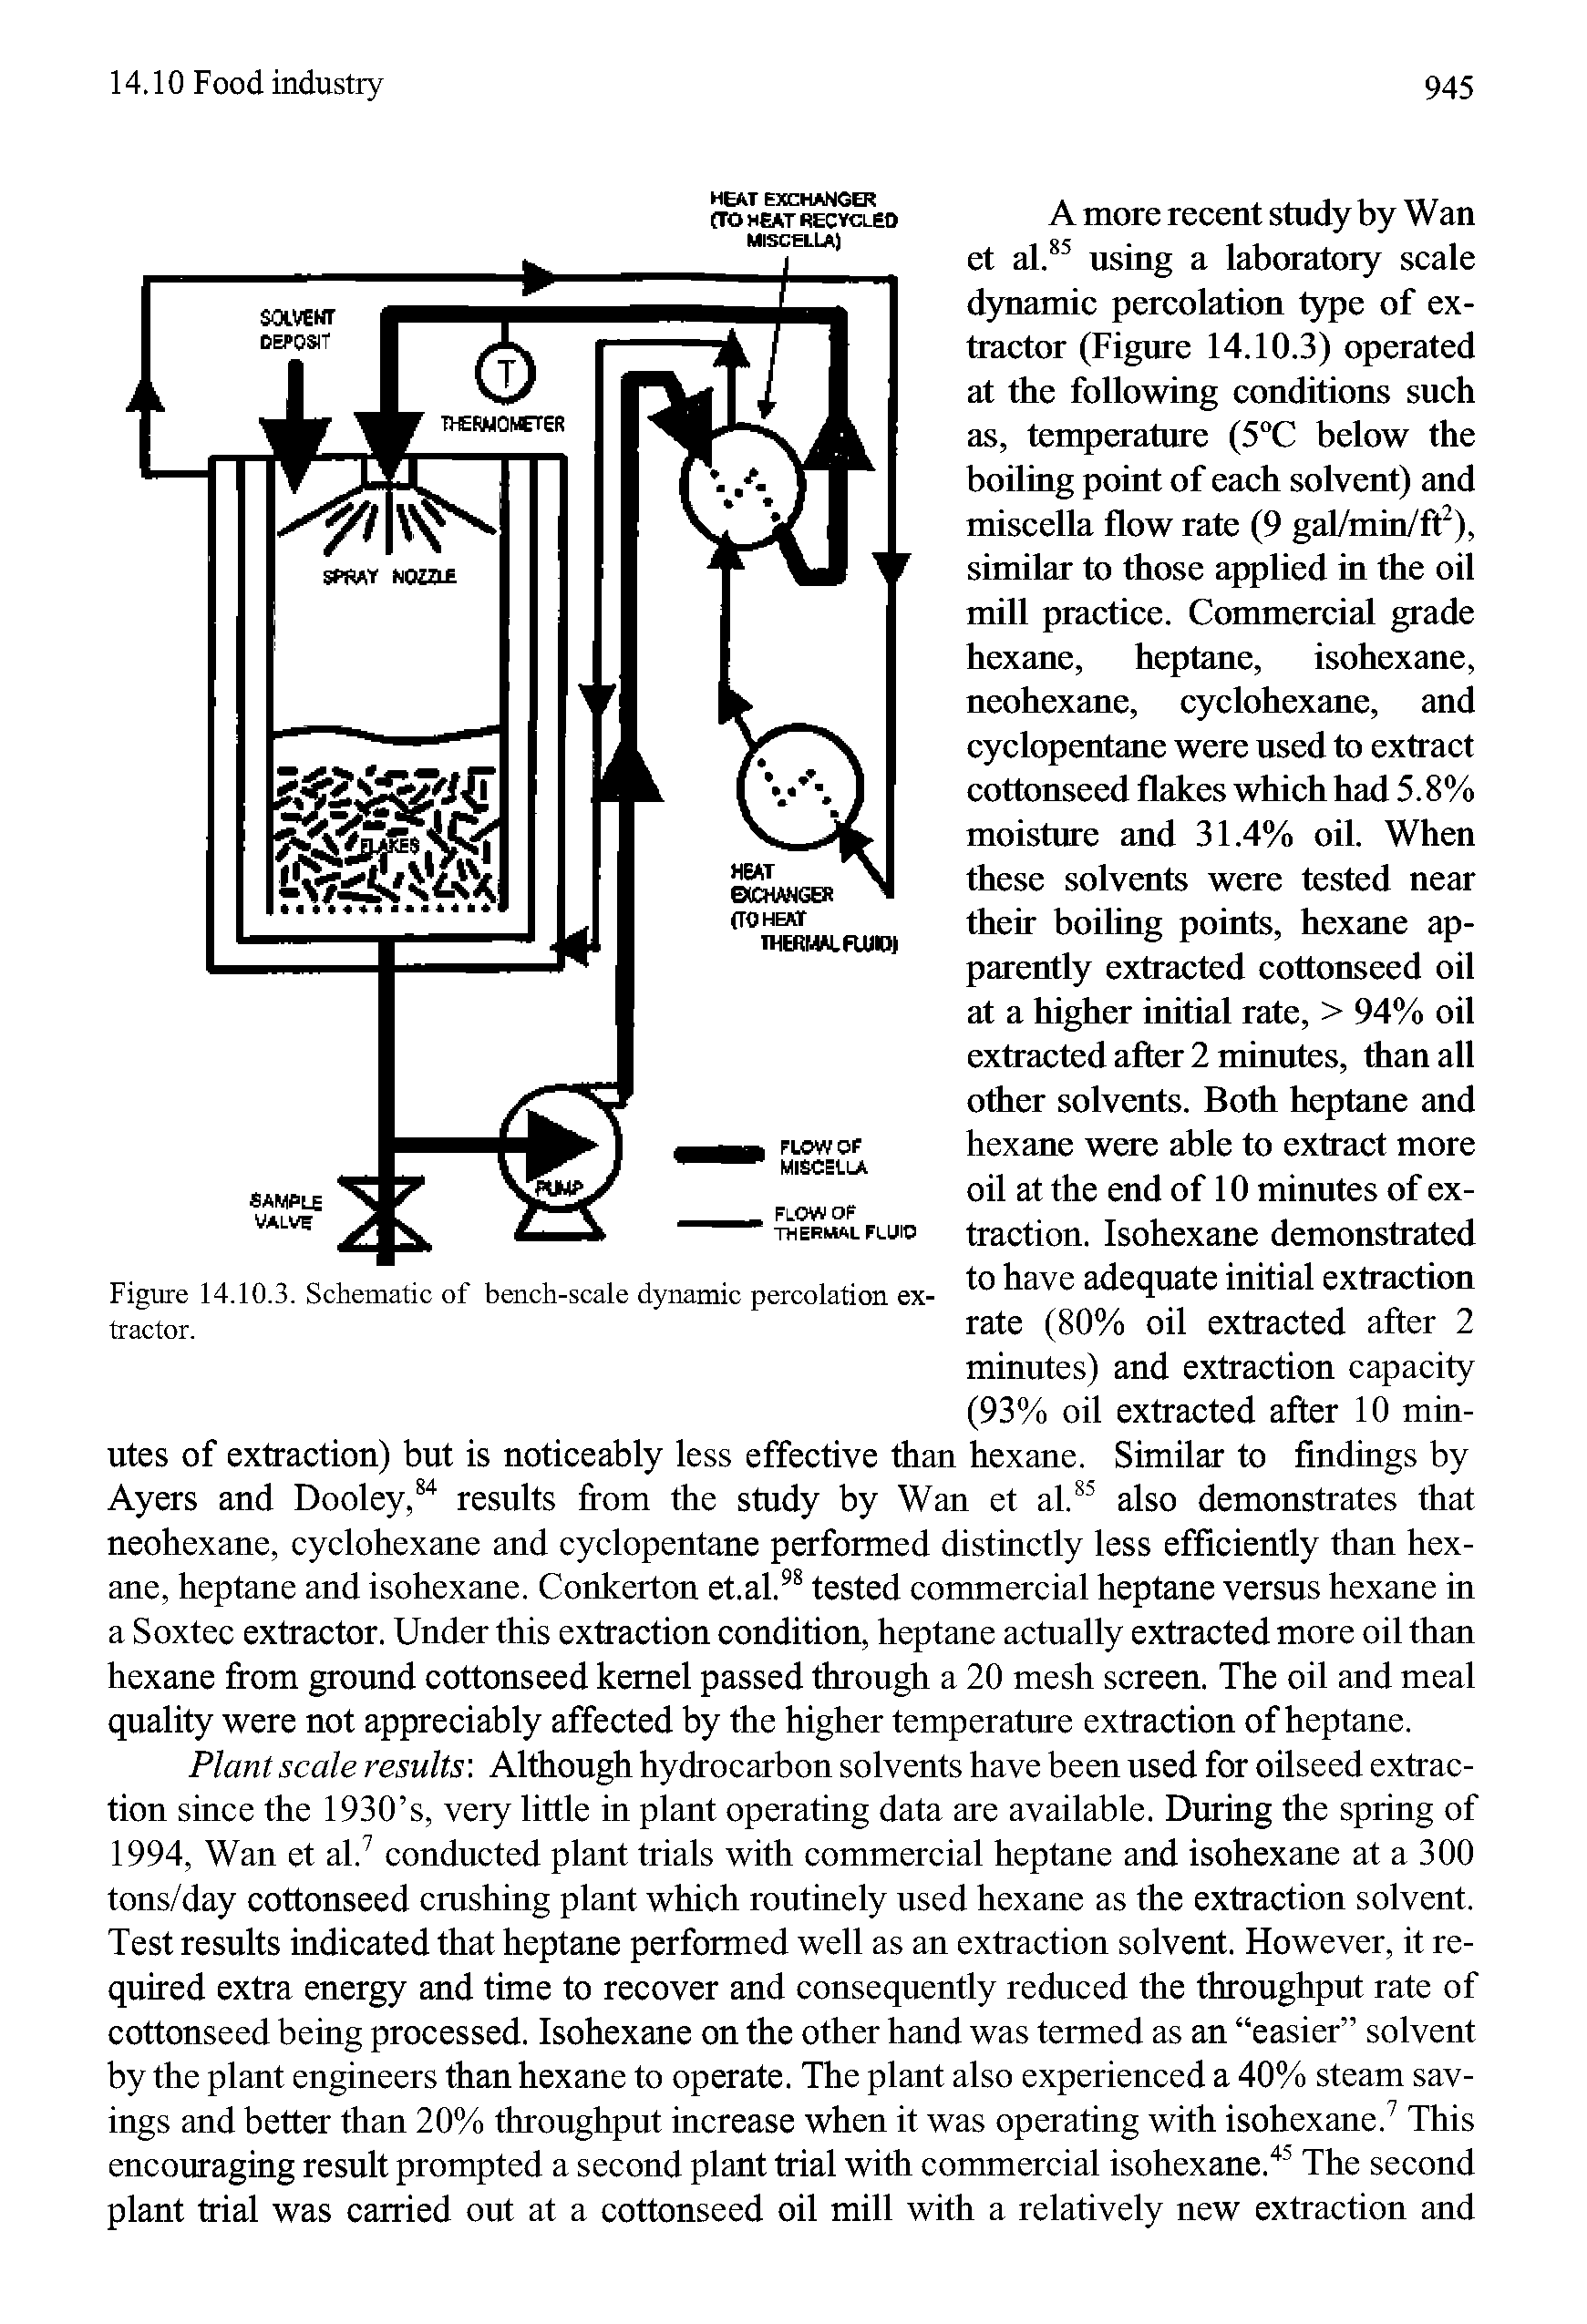 Figure 14.10.3. Schematic of bench-scale dynamic percolation extractor.